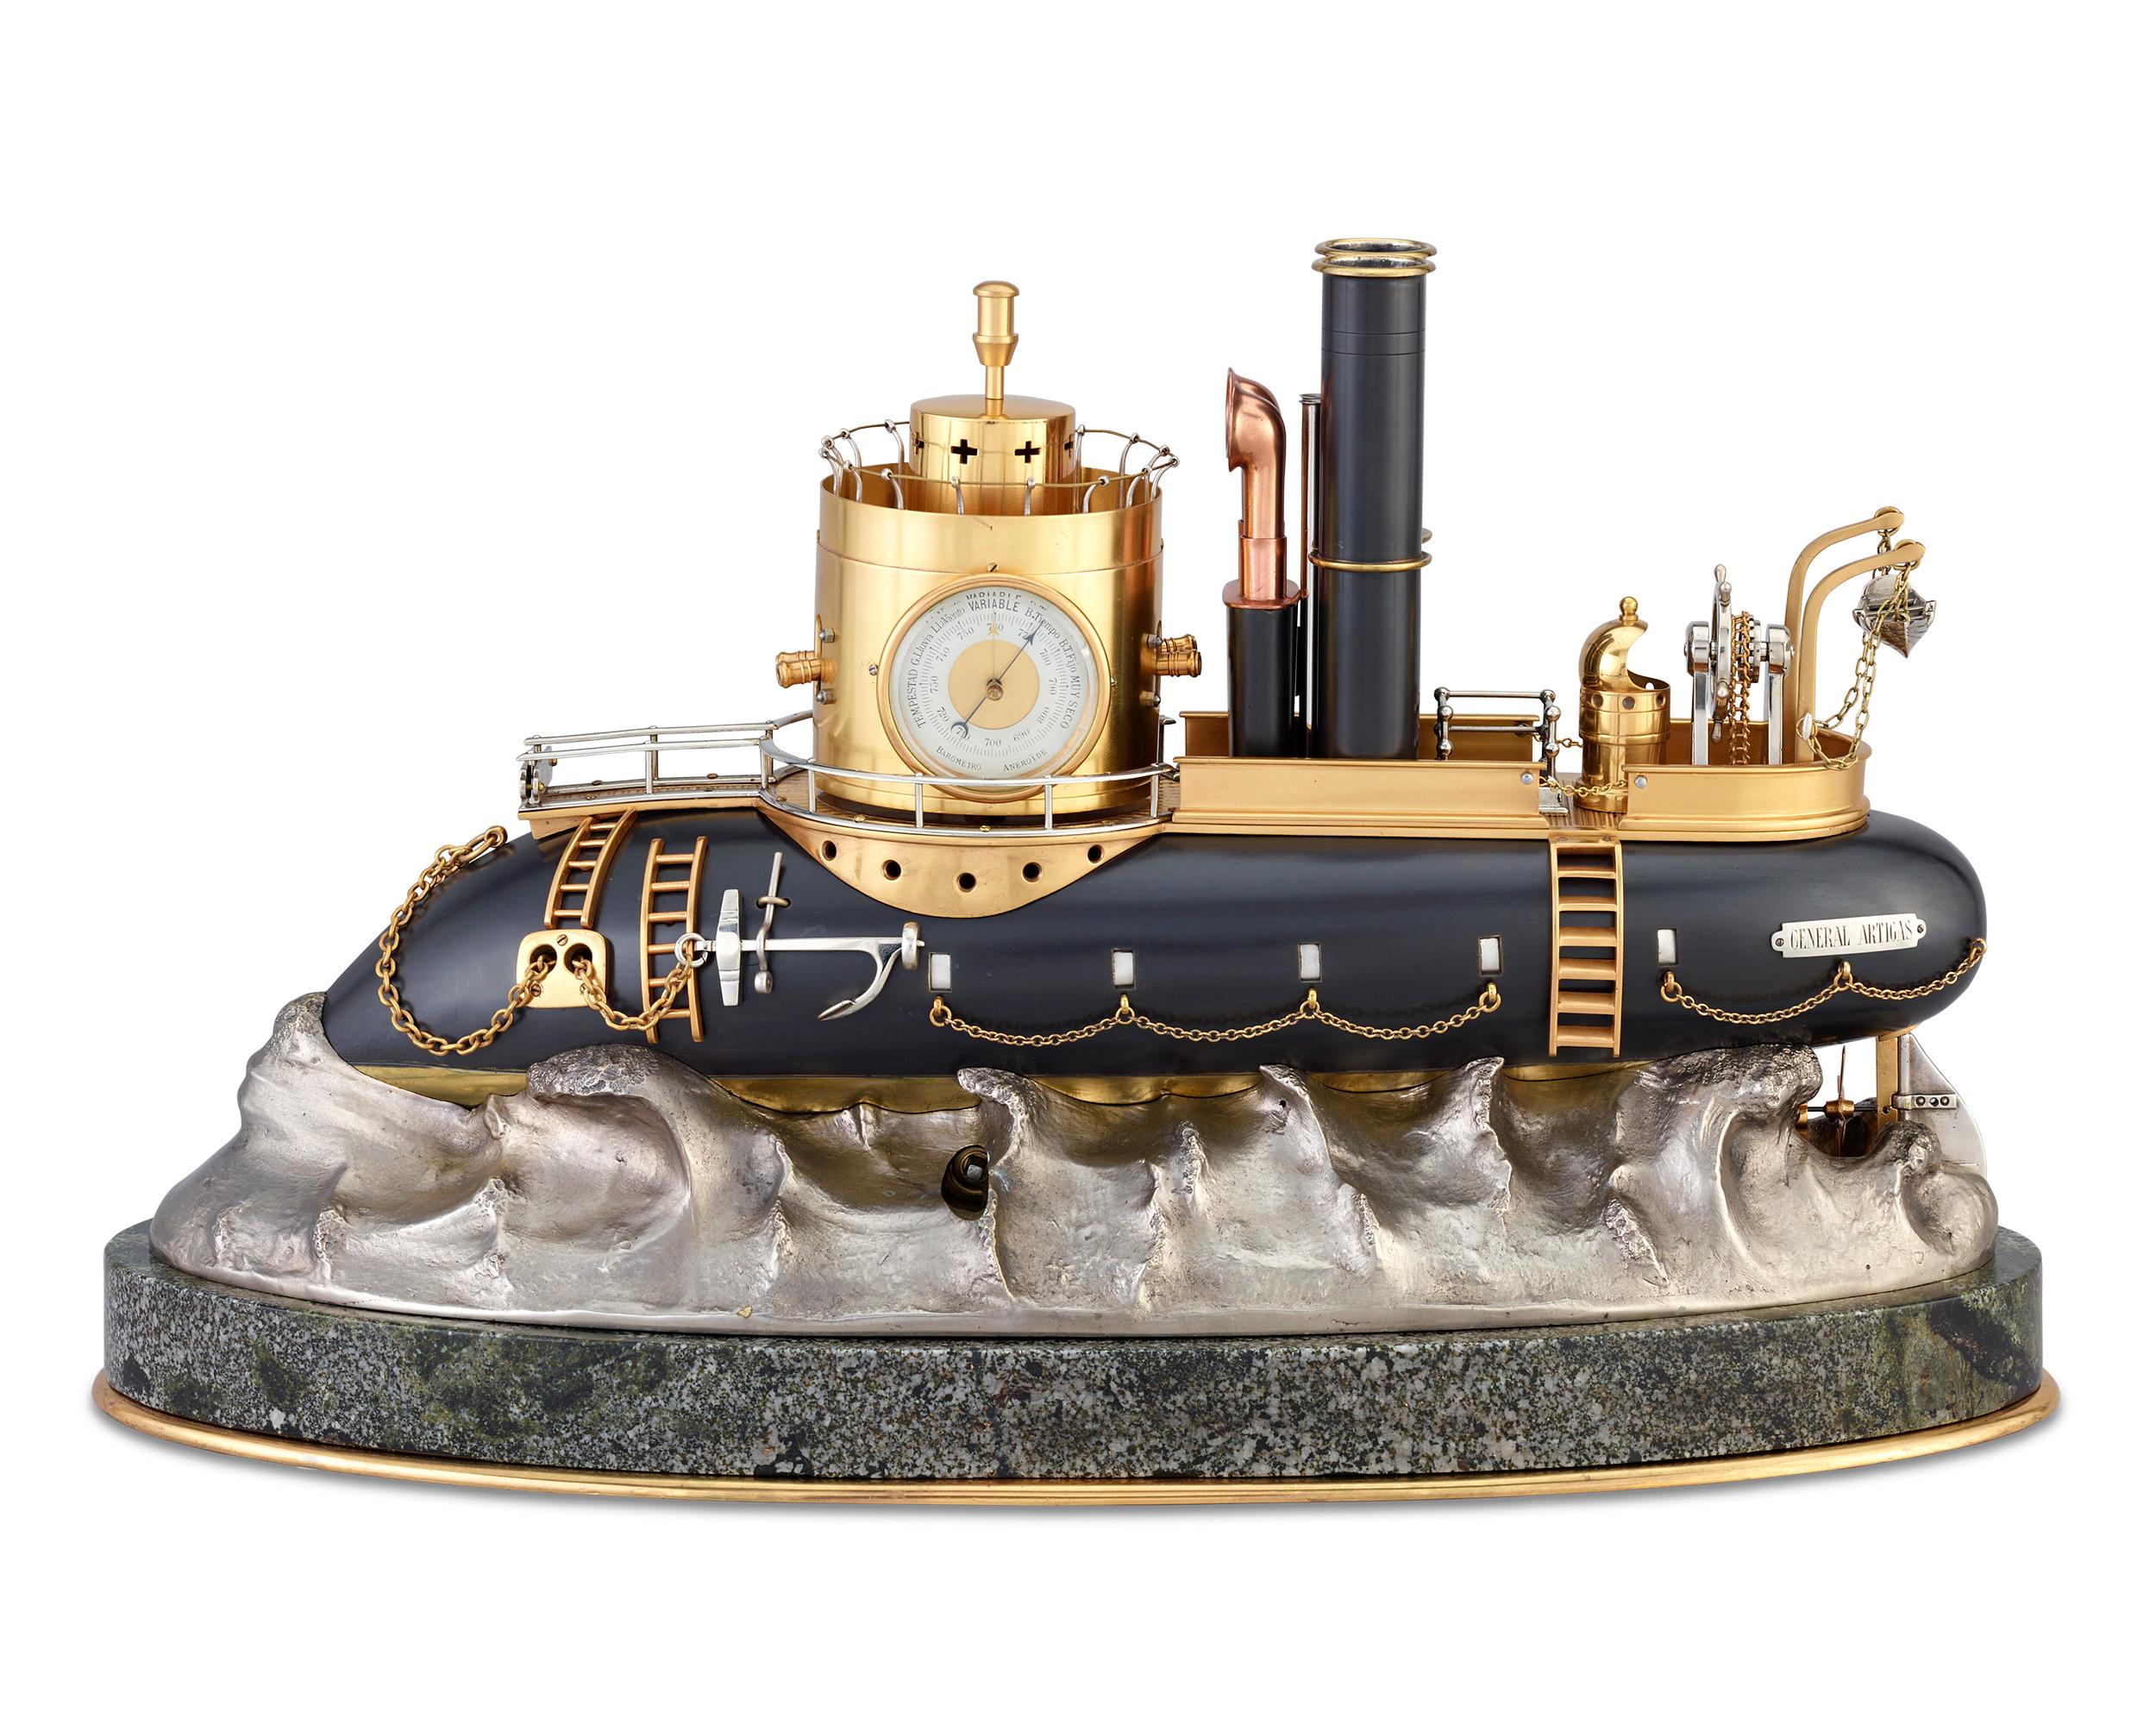 This automaton gunboat clock is an impeccable example of the complex artistry of industrial timepieces. An automaton is incorporated into the ship's form, with a separate mechanism that causes the propeller to spin and the turret to rotate 360